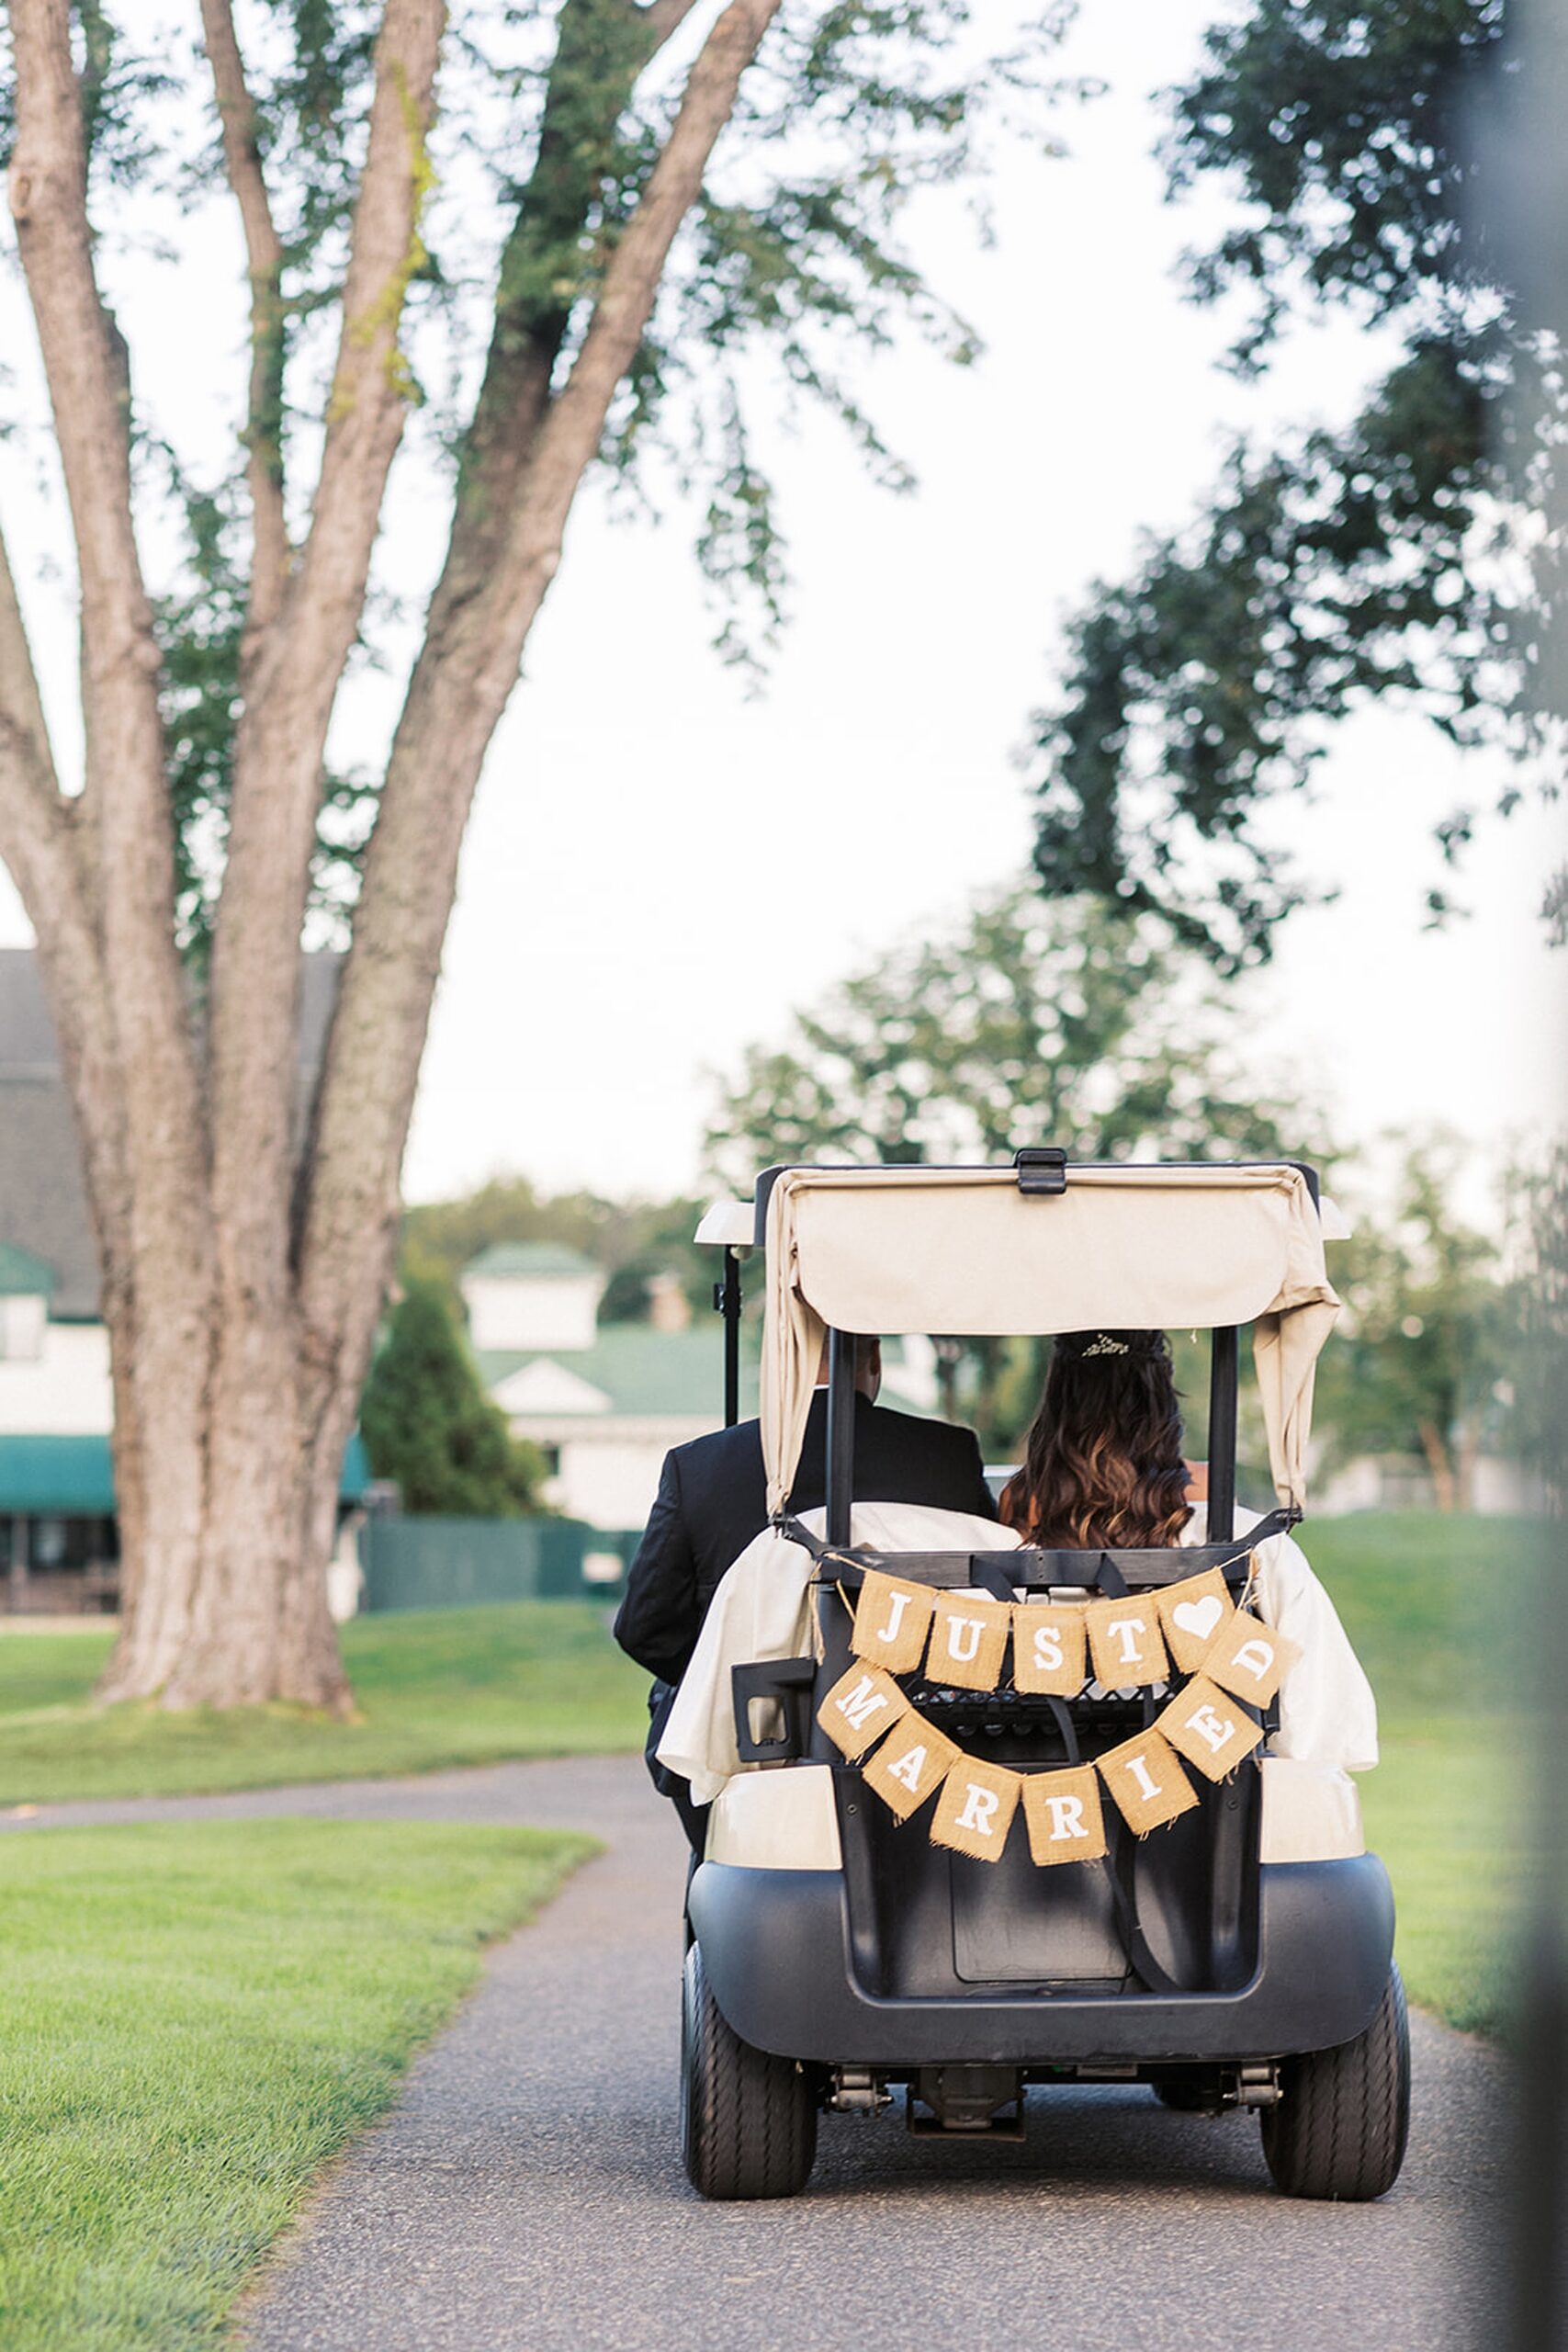 Newlyweds ride away in a golf cart with a "Just Married" banner on the back at an edgewood country club wedding